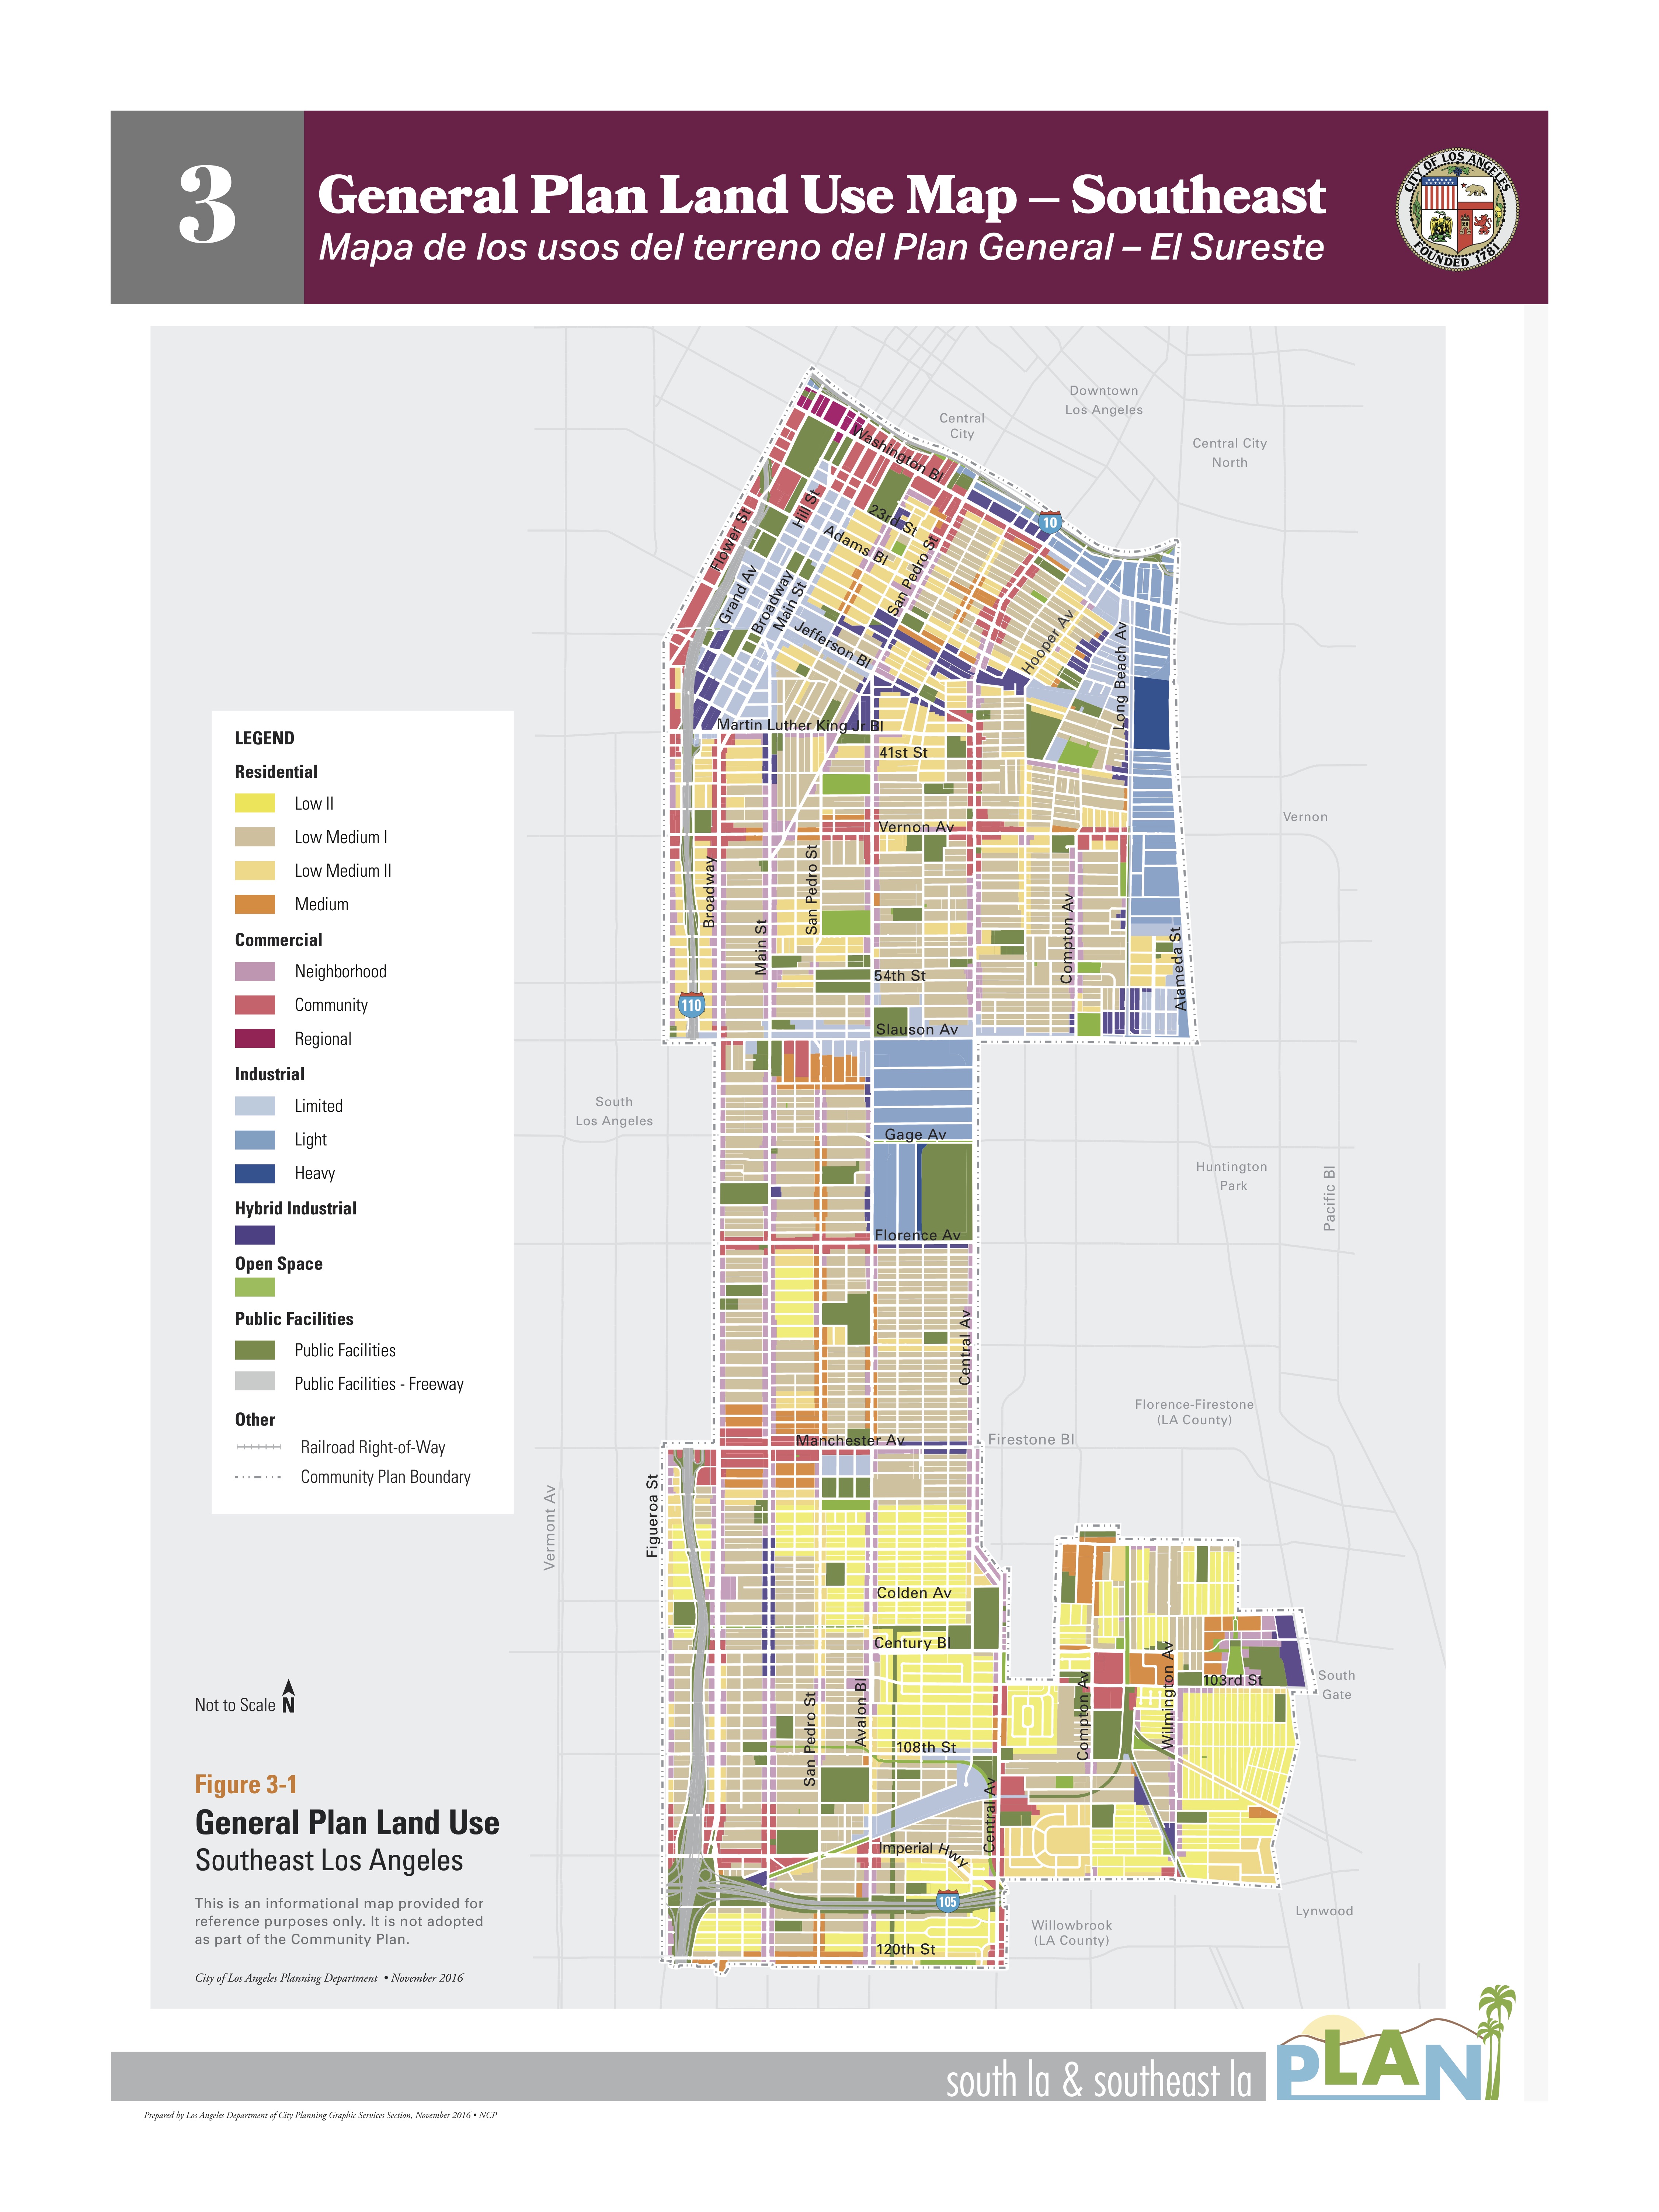 Map of Southeast LA showing zoning changes